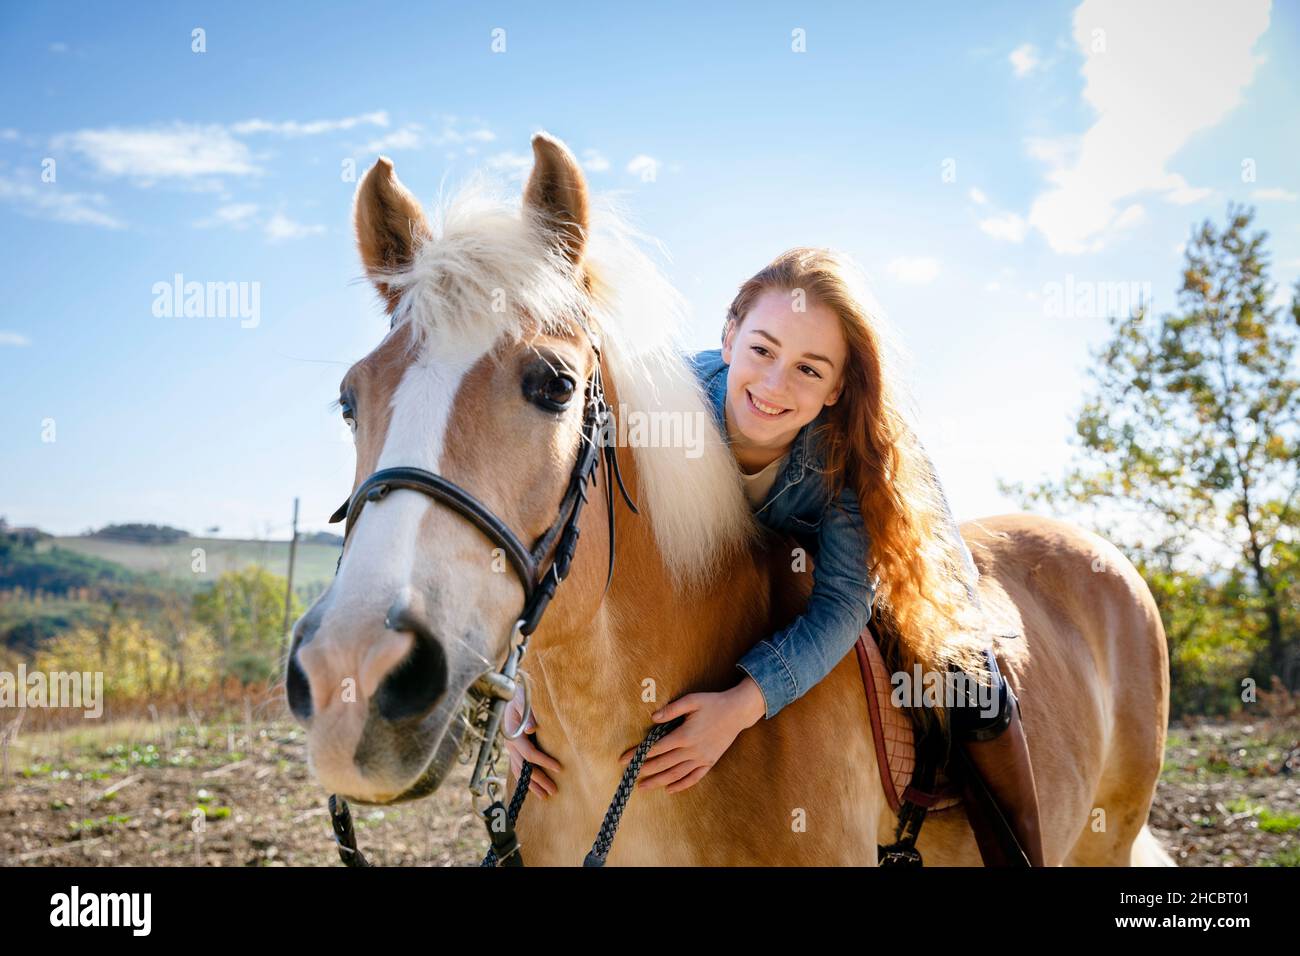 Smiling woman sitting on horse at meadow during weekend Stock Photo